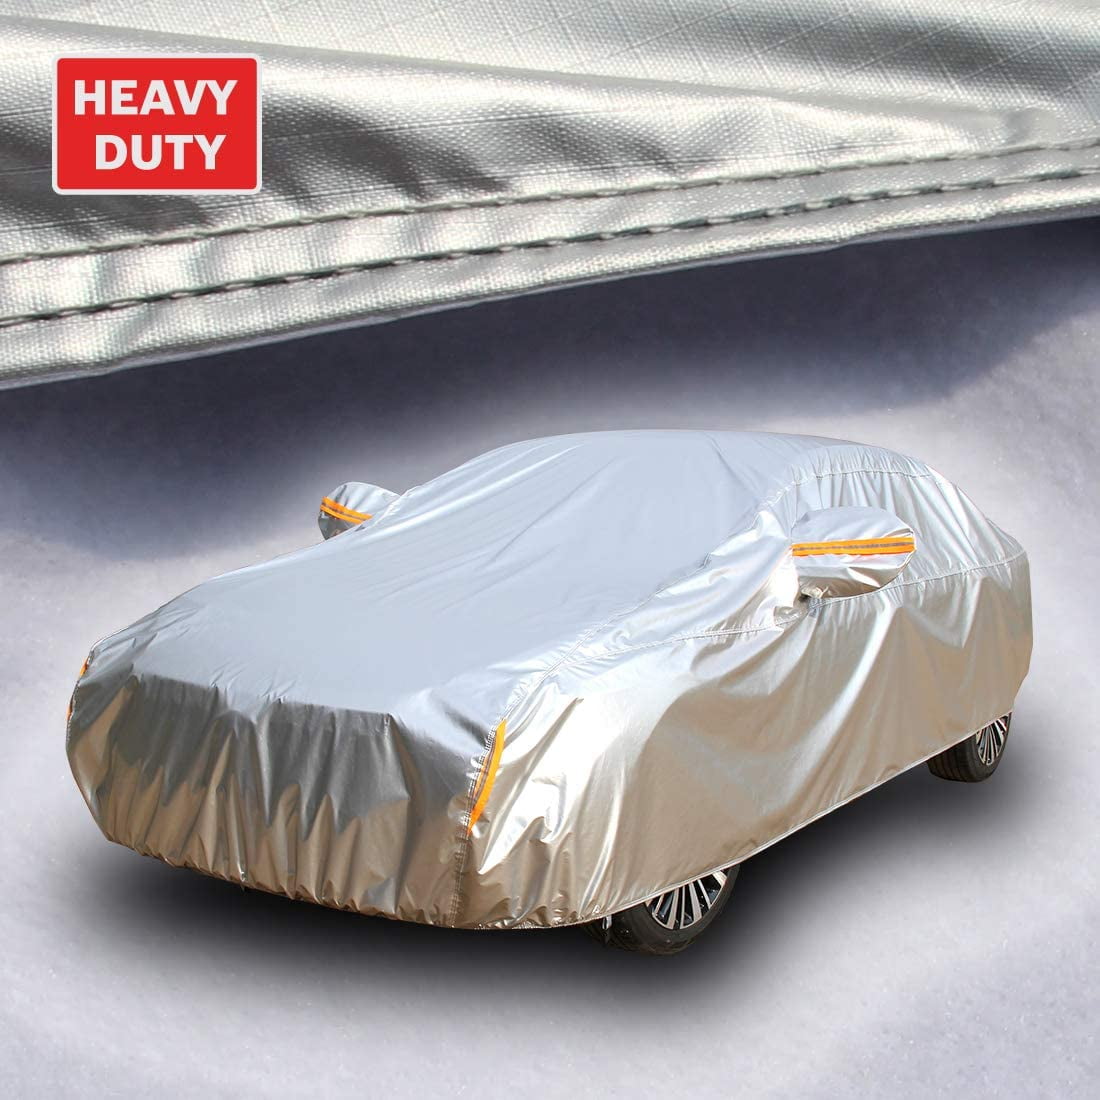 Universal Fit for Hatchback 160-172 Coverado Outdoor Super Heavy Duty Full Cover with Lock/Fleece Lining 6 Layers Car Covers for Automobiles All Weather Waterproof Rain UV Snow Heat Protection 